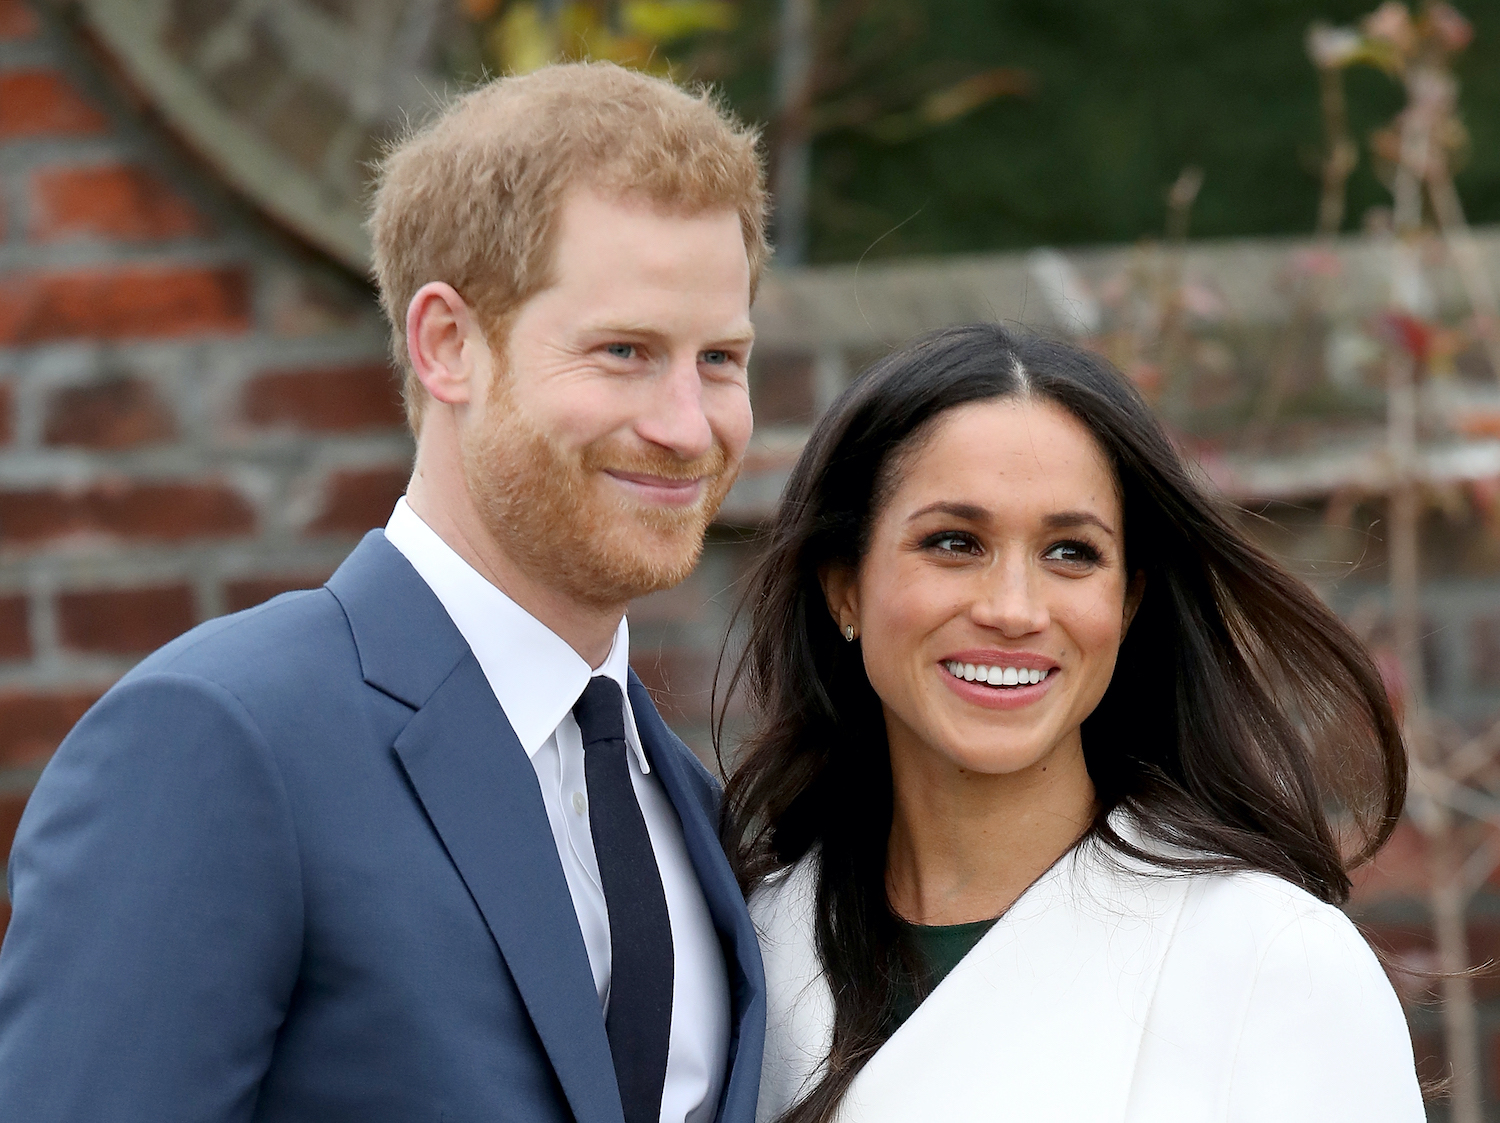 Prince Harry and Meghan Markle during an official photocall to announce their engagement at The Sunken Gardens at Kensington Palace